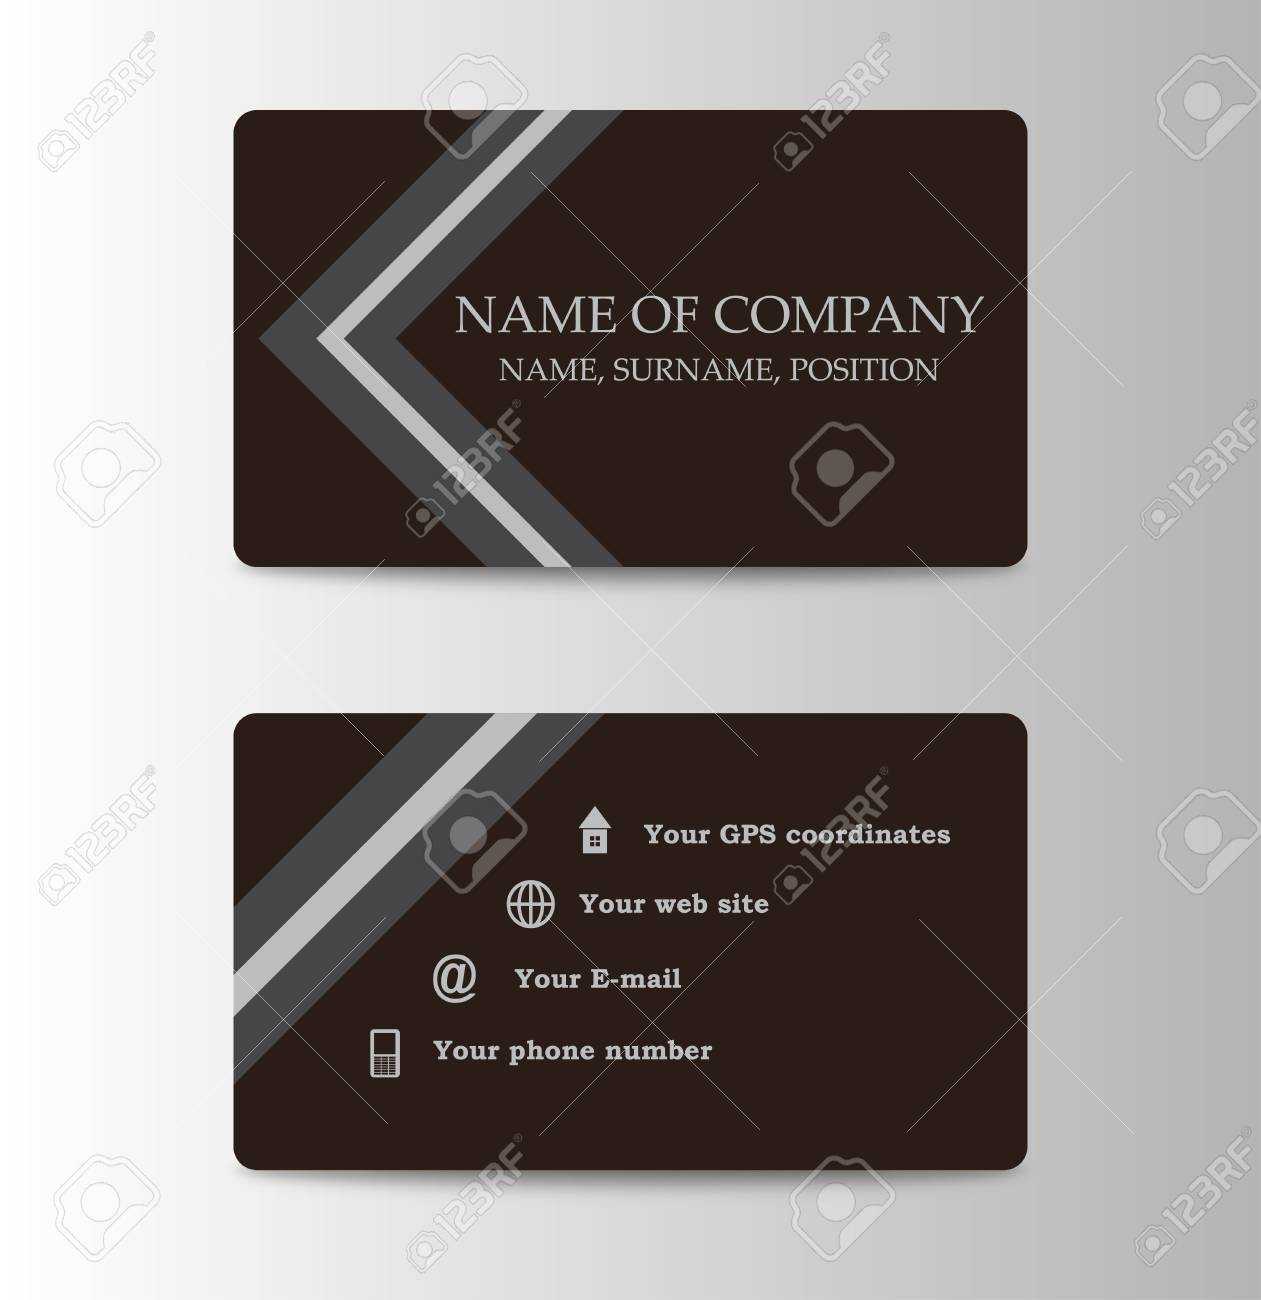 Corporate Id Card Design Template. Personal Id Card For Business.. With Regard To Personal Identification Card Template